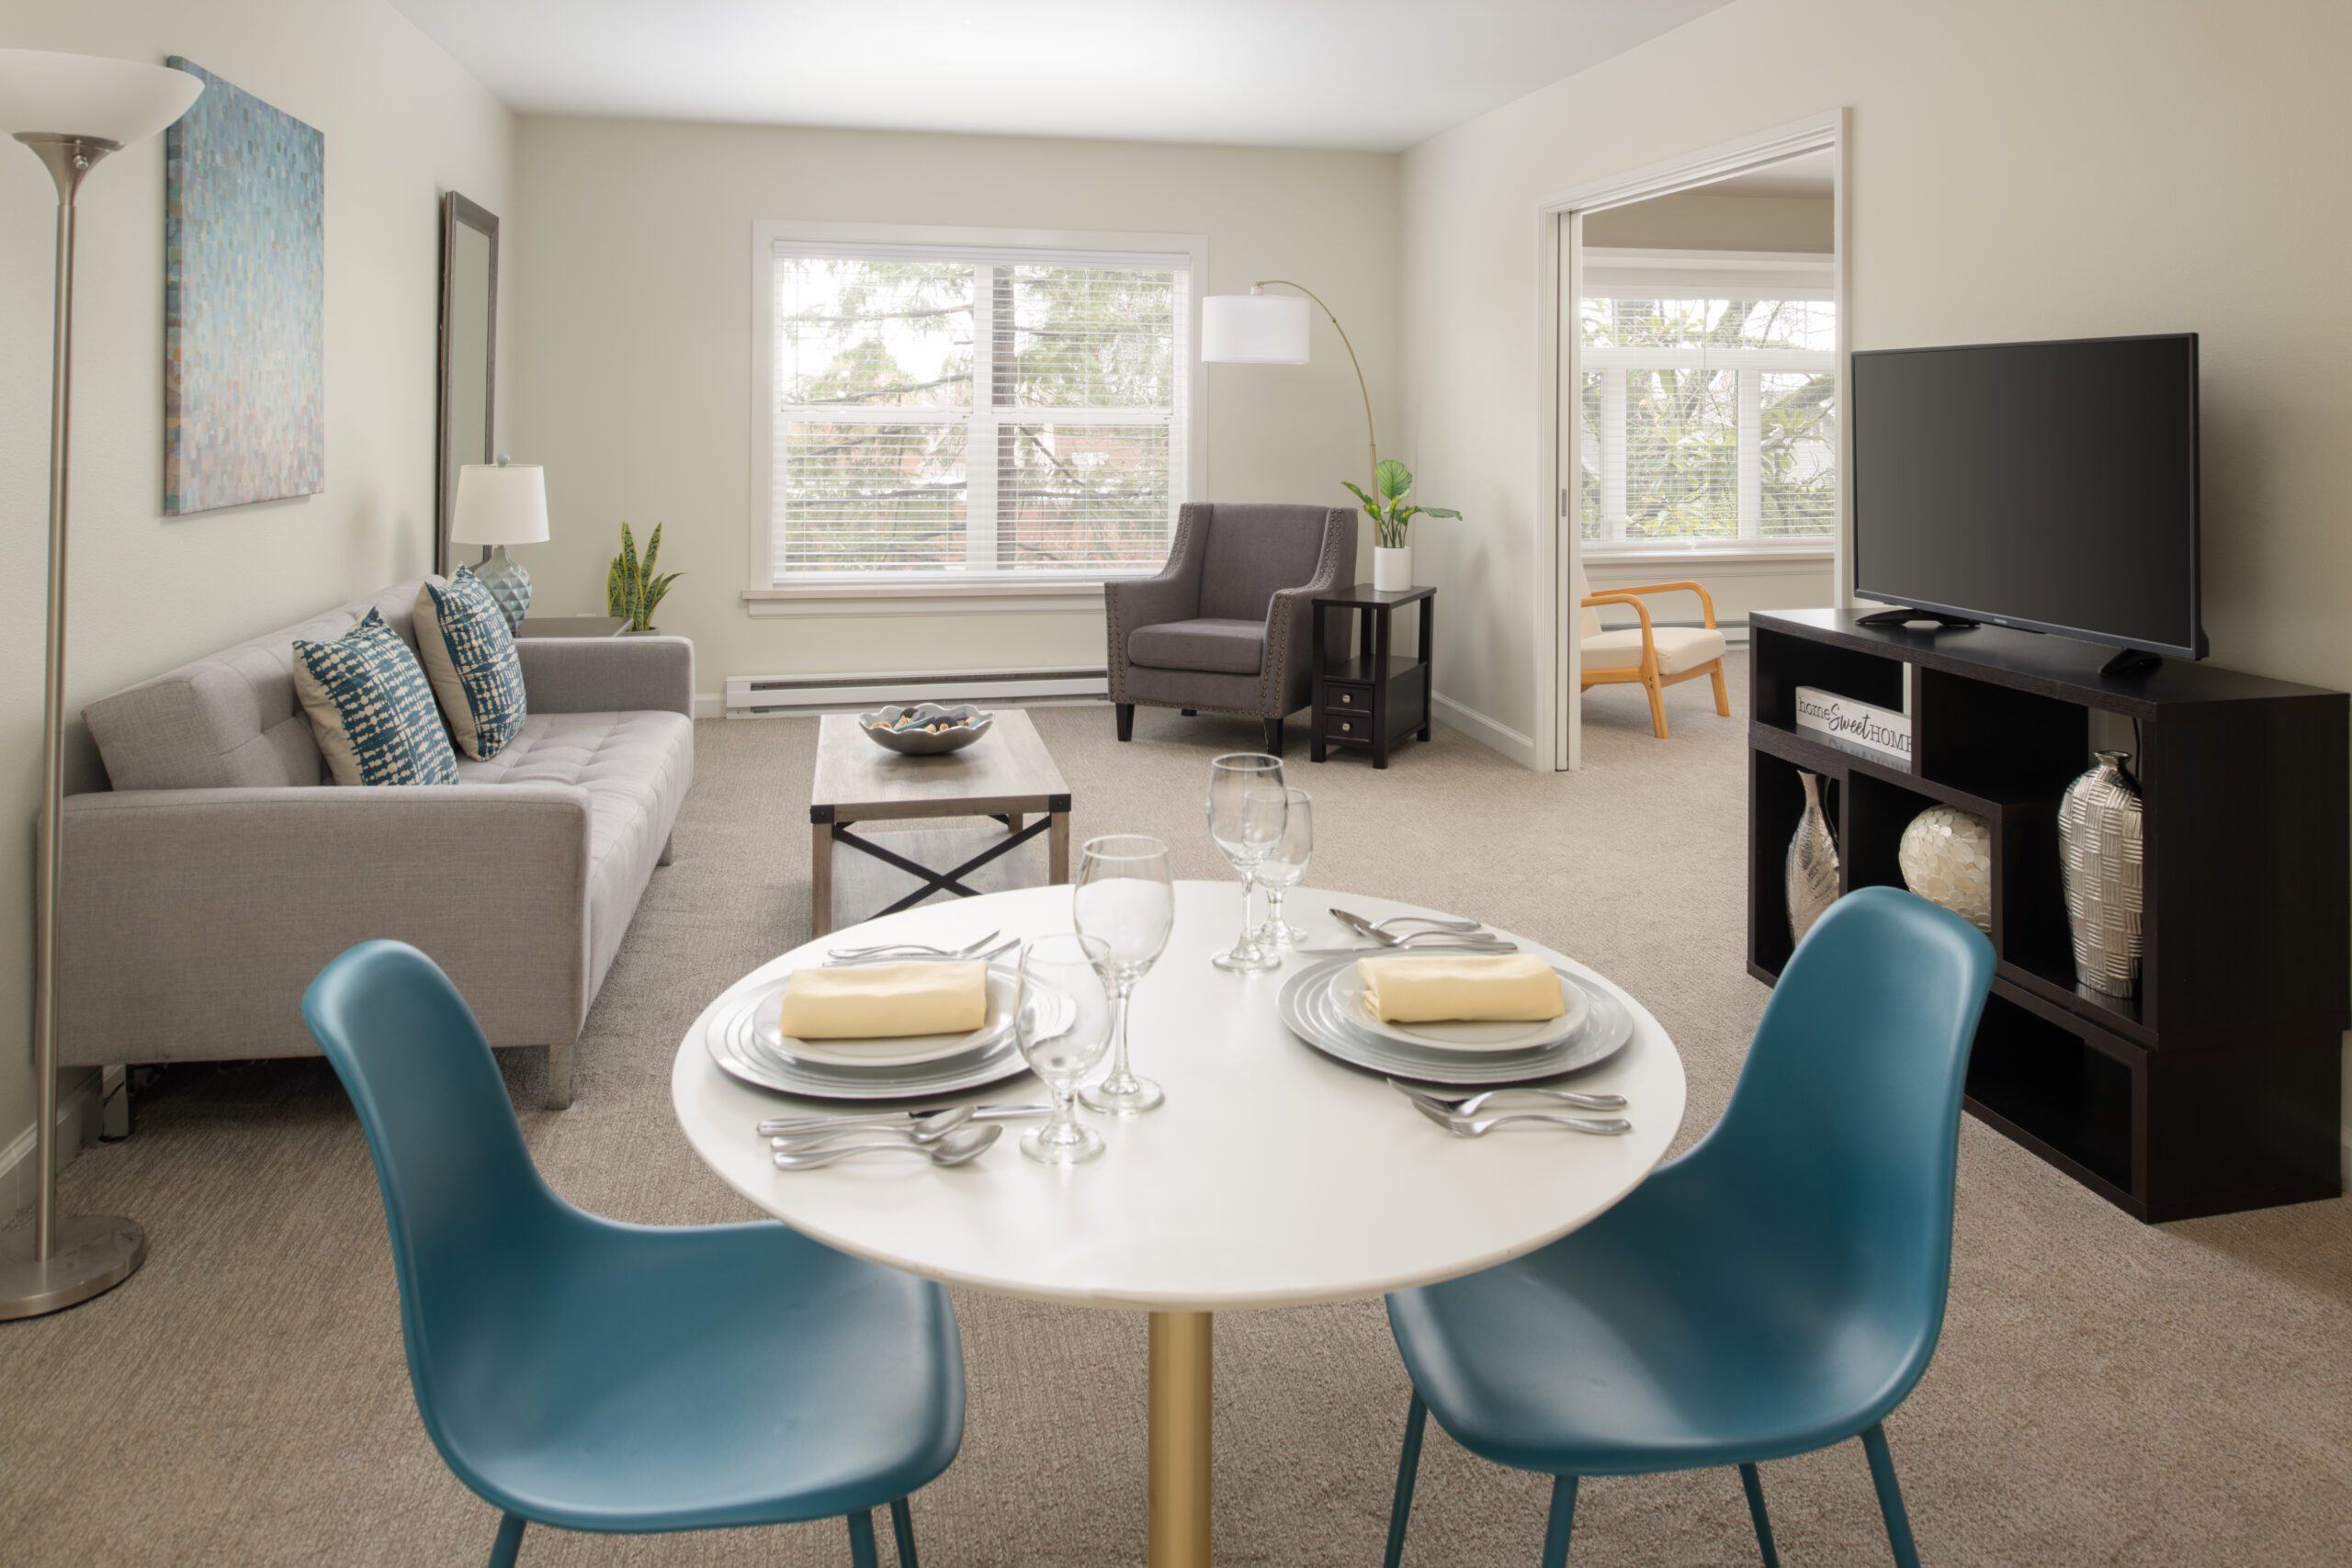 A cozy living room with a stylish dining table and chairs, creating a perfect space for meals and gatherings.